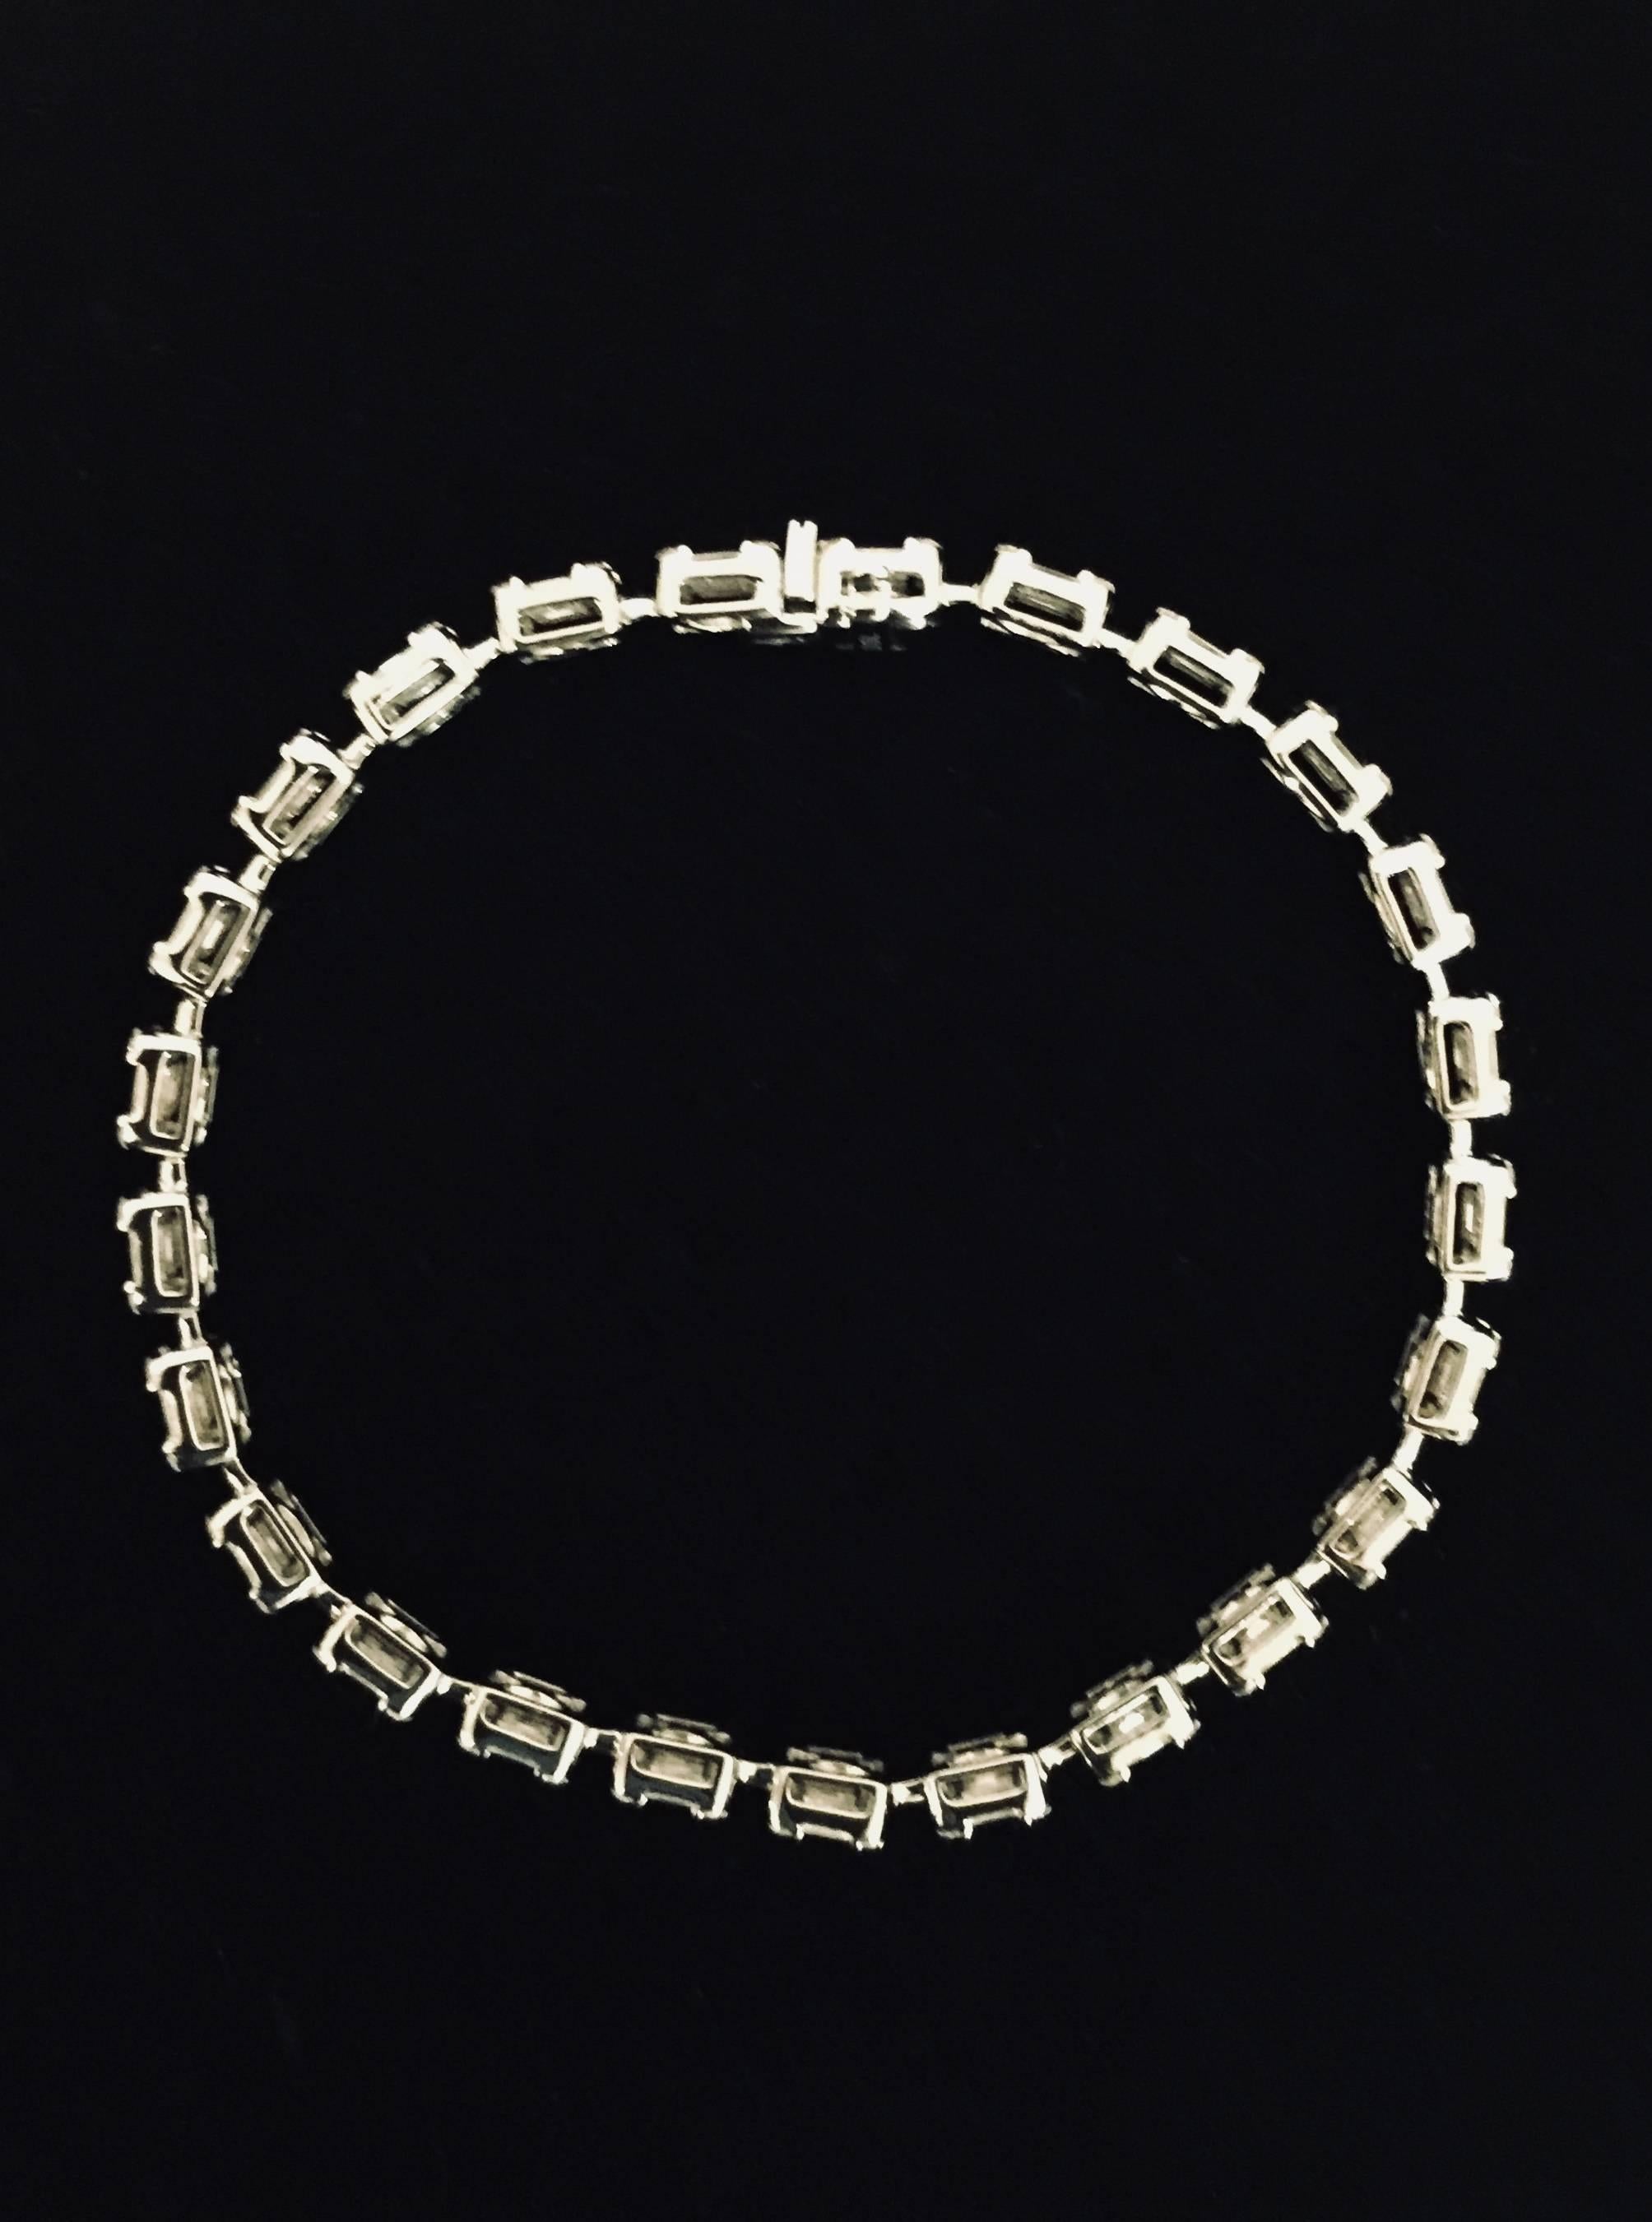 Brilliant design idea!  This inline 18 karat white gold bracelet features masterfully set round diamonds at the corners of baguette diamonds.  The effect created is an inline bracelet of all larger emerald cuts!  Absolutely can be worn daily! 